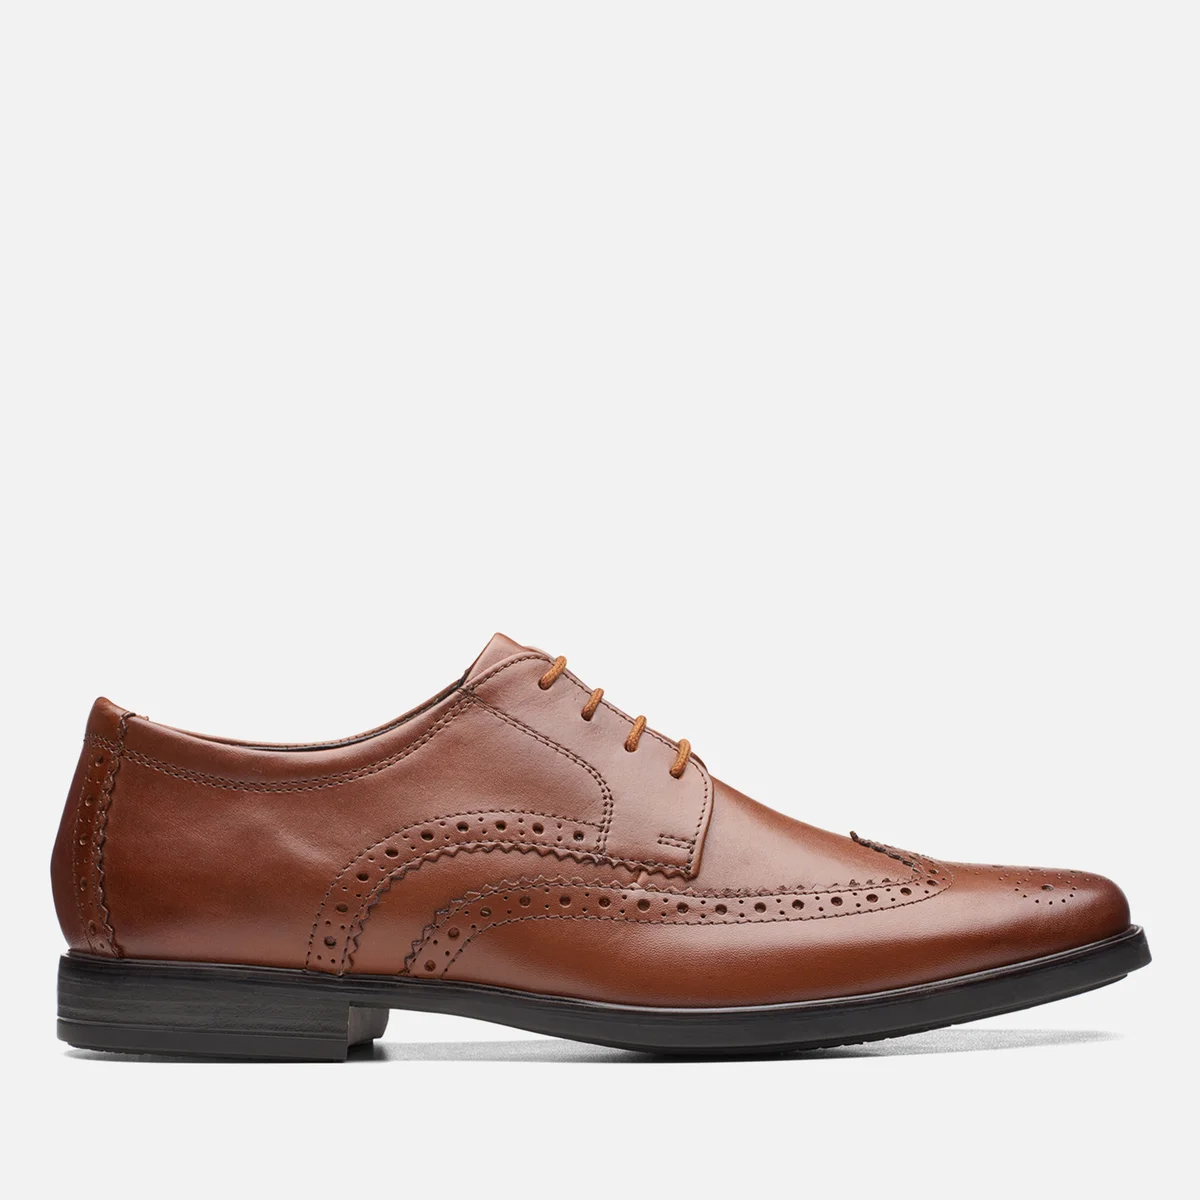 Clarks Howard Wing Leather Derby Shoes Image 1